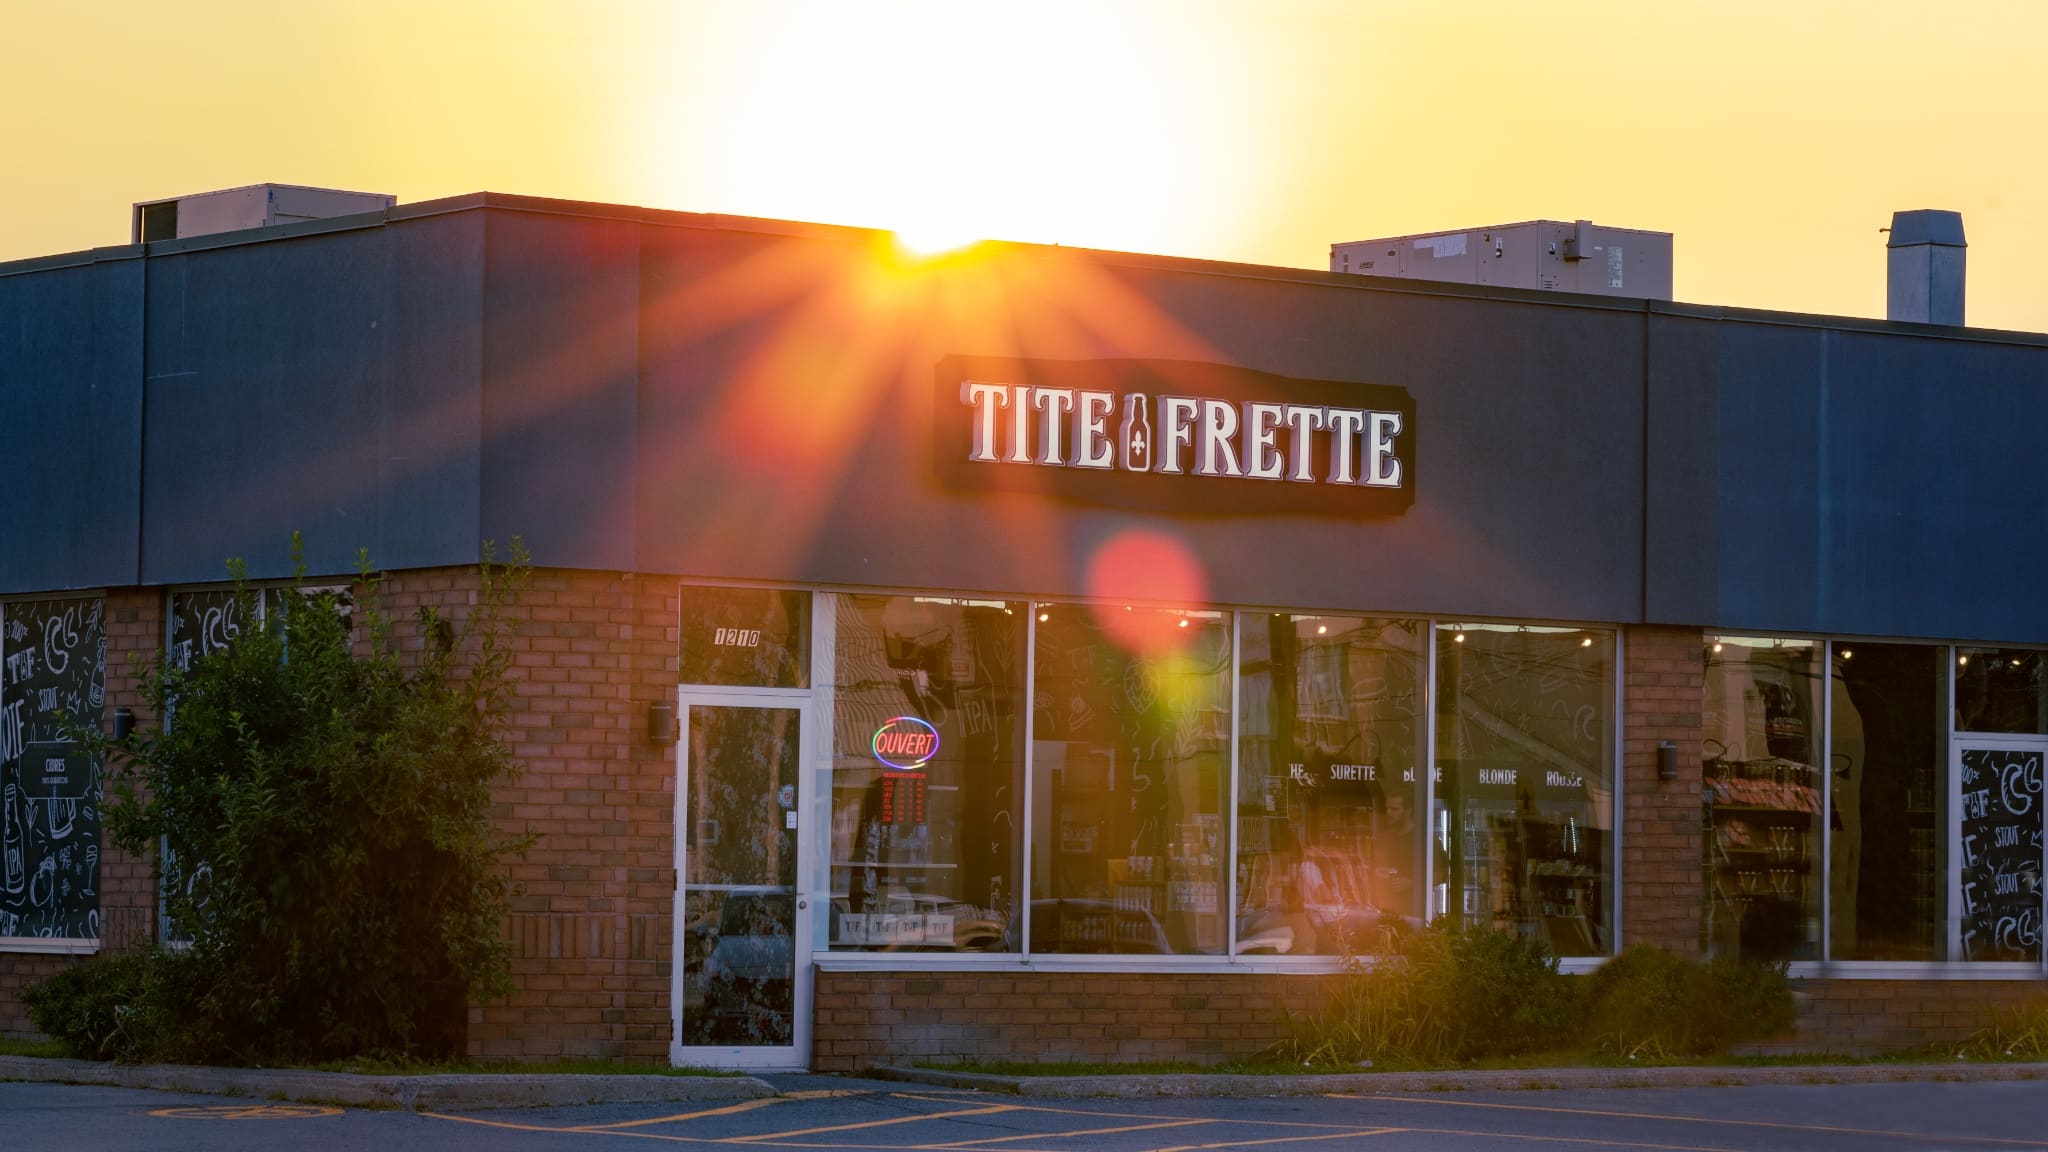 Featured image for “Tite Frette”